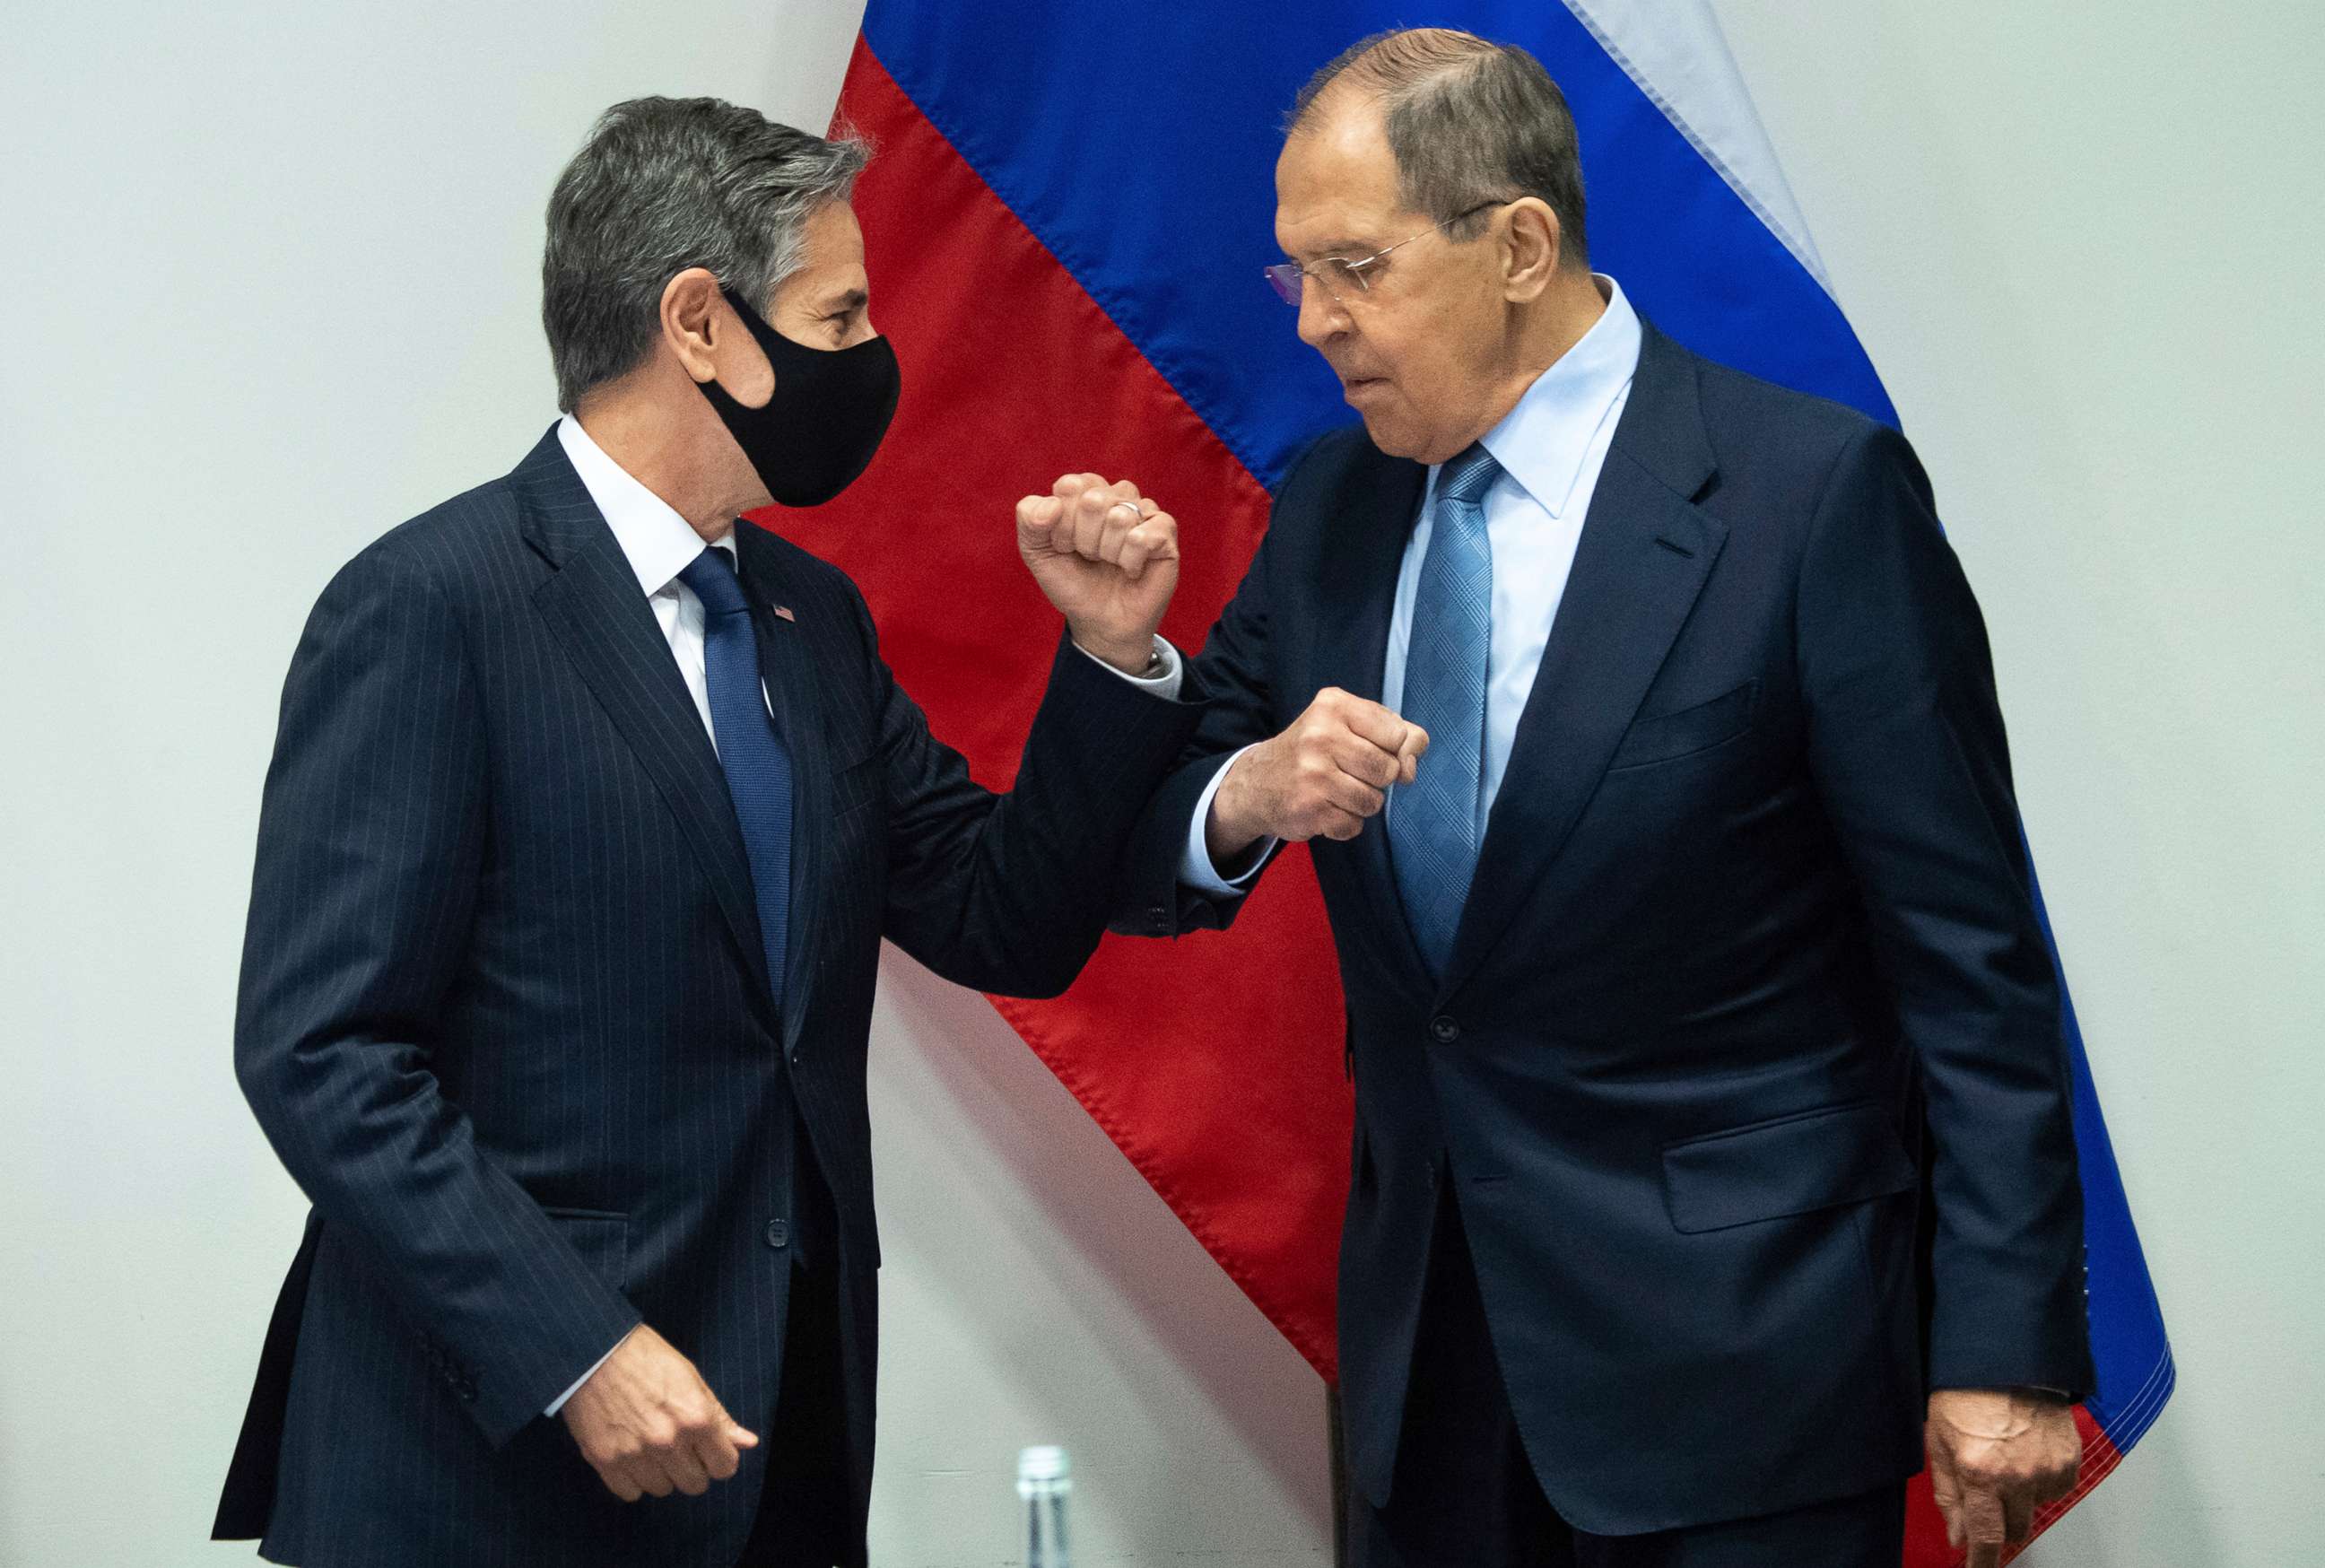 PHOTO: Secretary of State Antony Blinken, left, greets Russian Foreign Minister Sergey Lavrov, right, as they arrive for a meeting at the Harpa Concert Hall in Reykjavik, Iceland, May 19, 2021, on the sidelines of the Arctic Council Ministerial summit. 